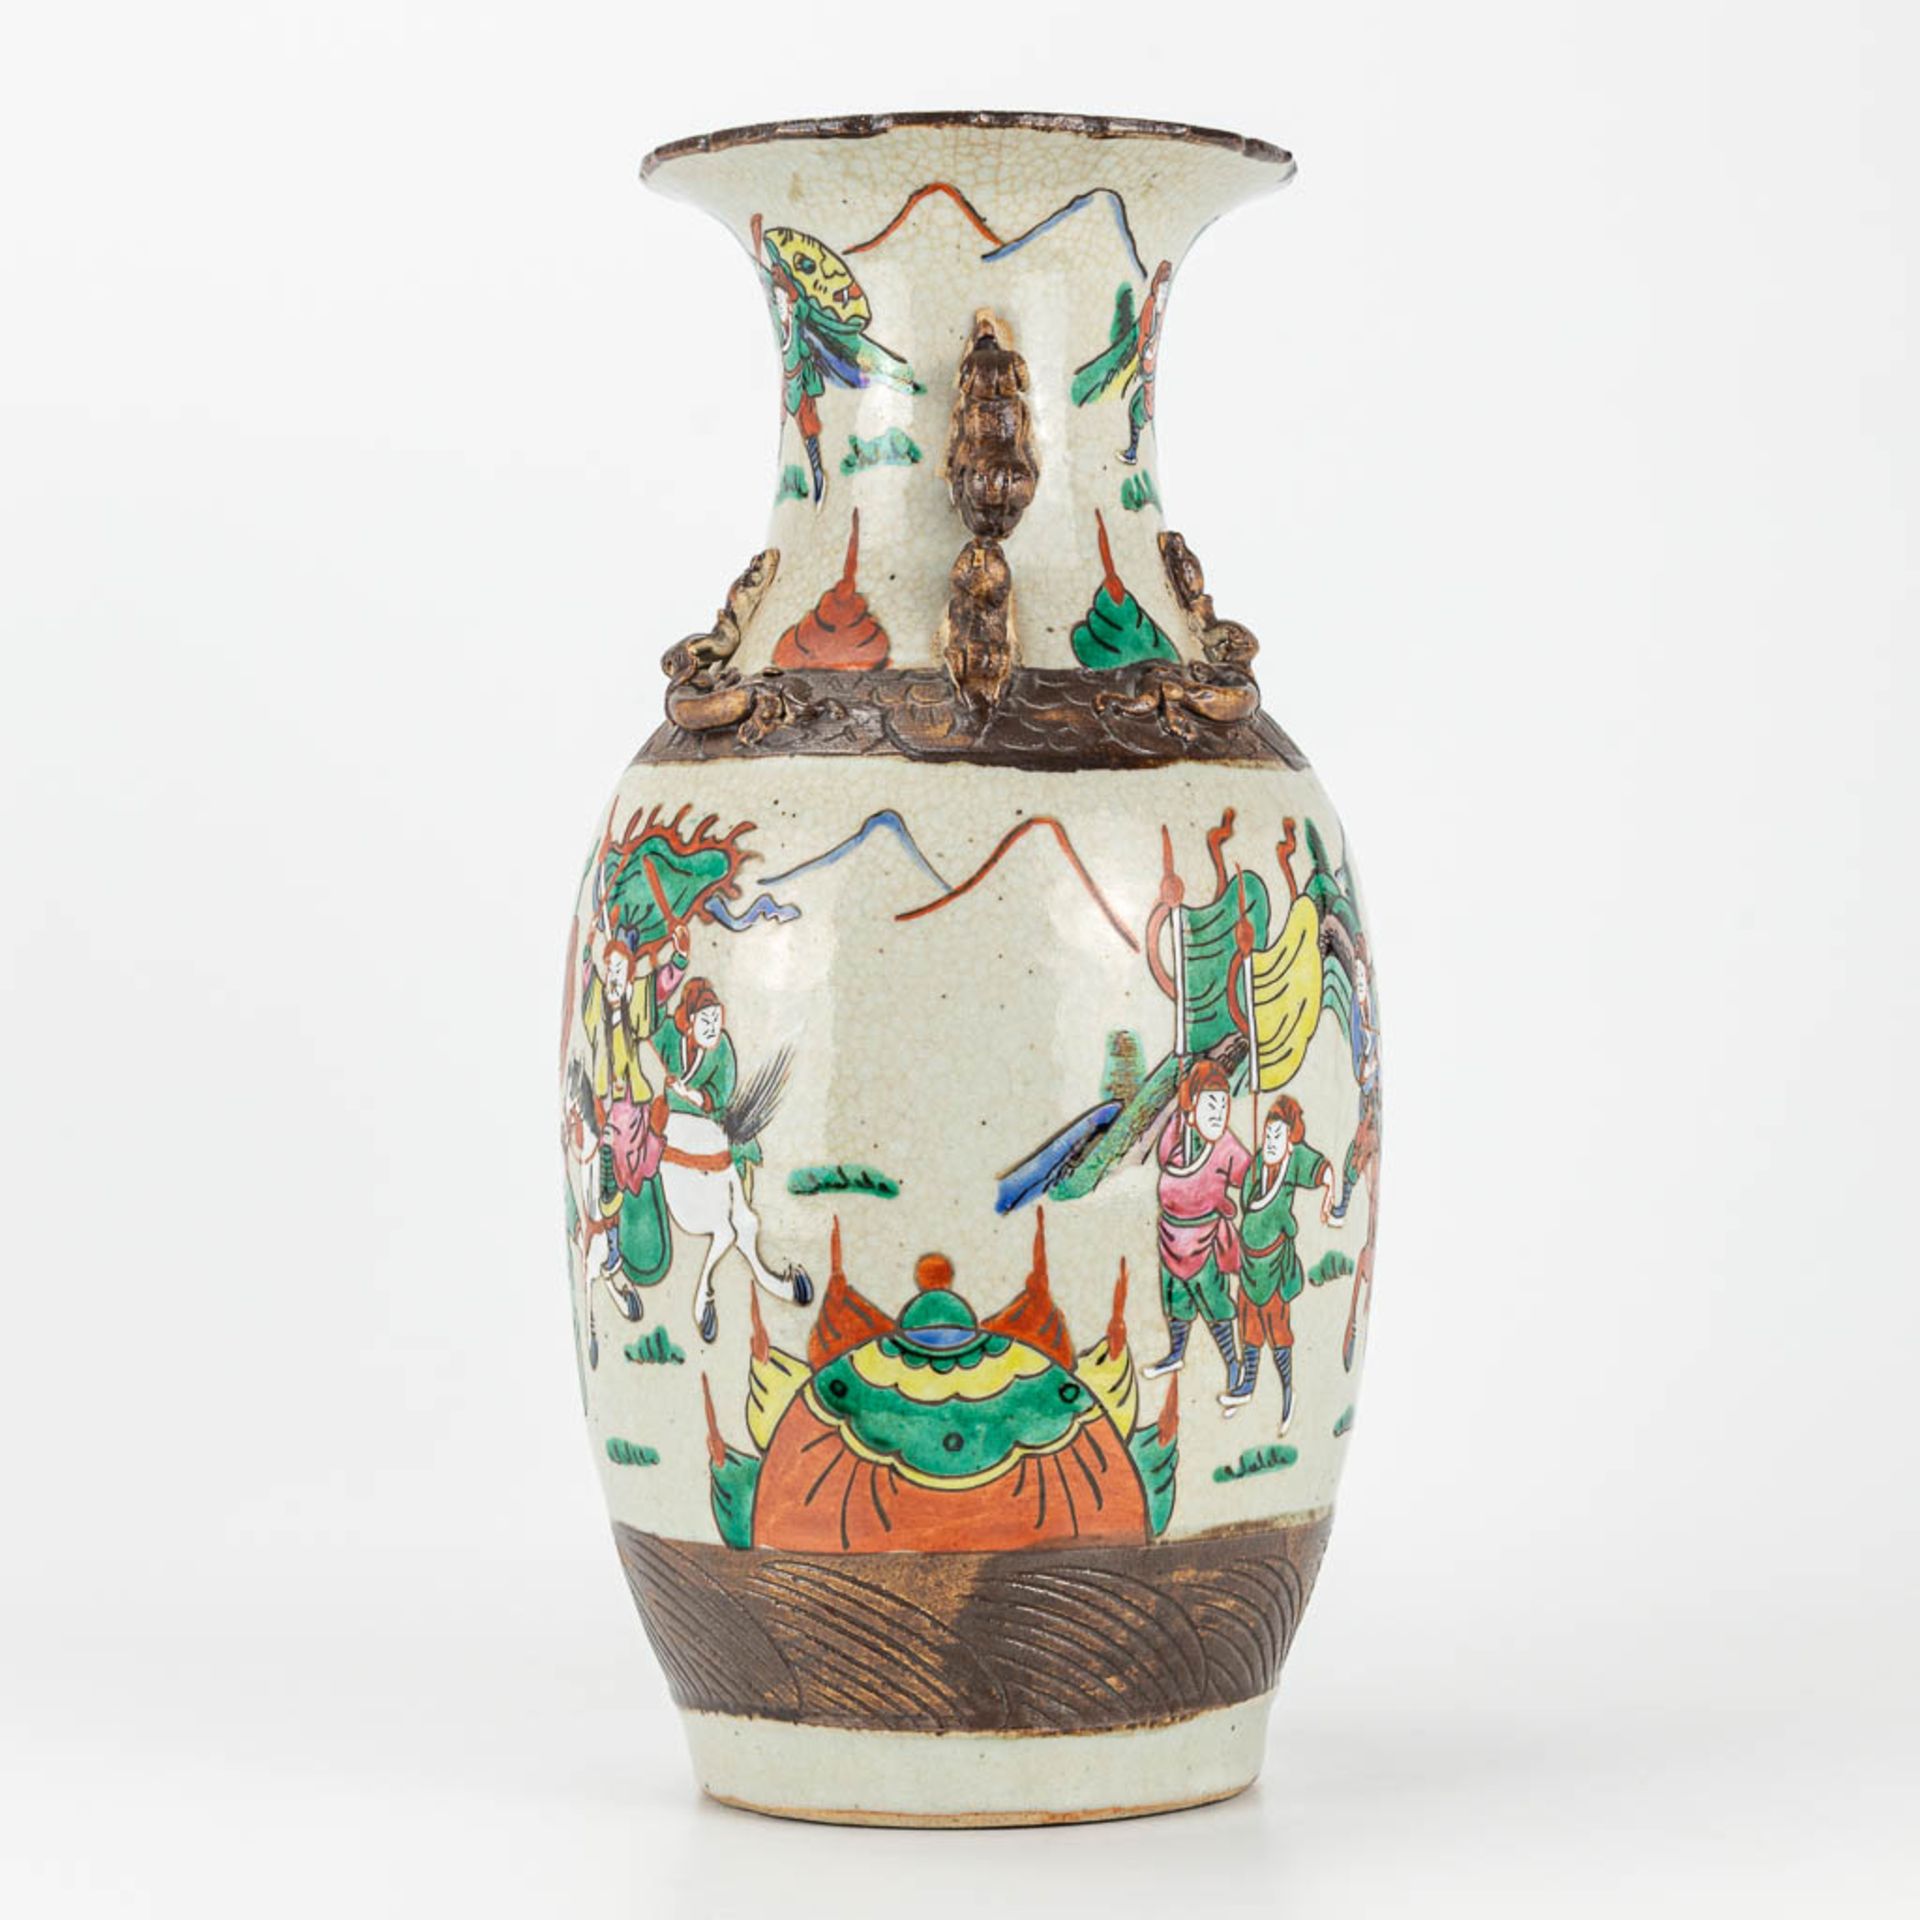 A Nanking vase made of Chinese porcleain and decorated with warriors - Image 3 of 15